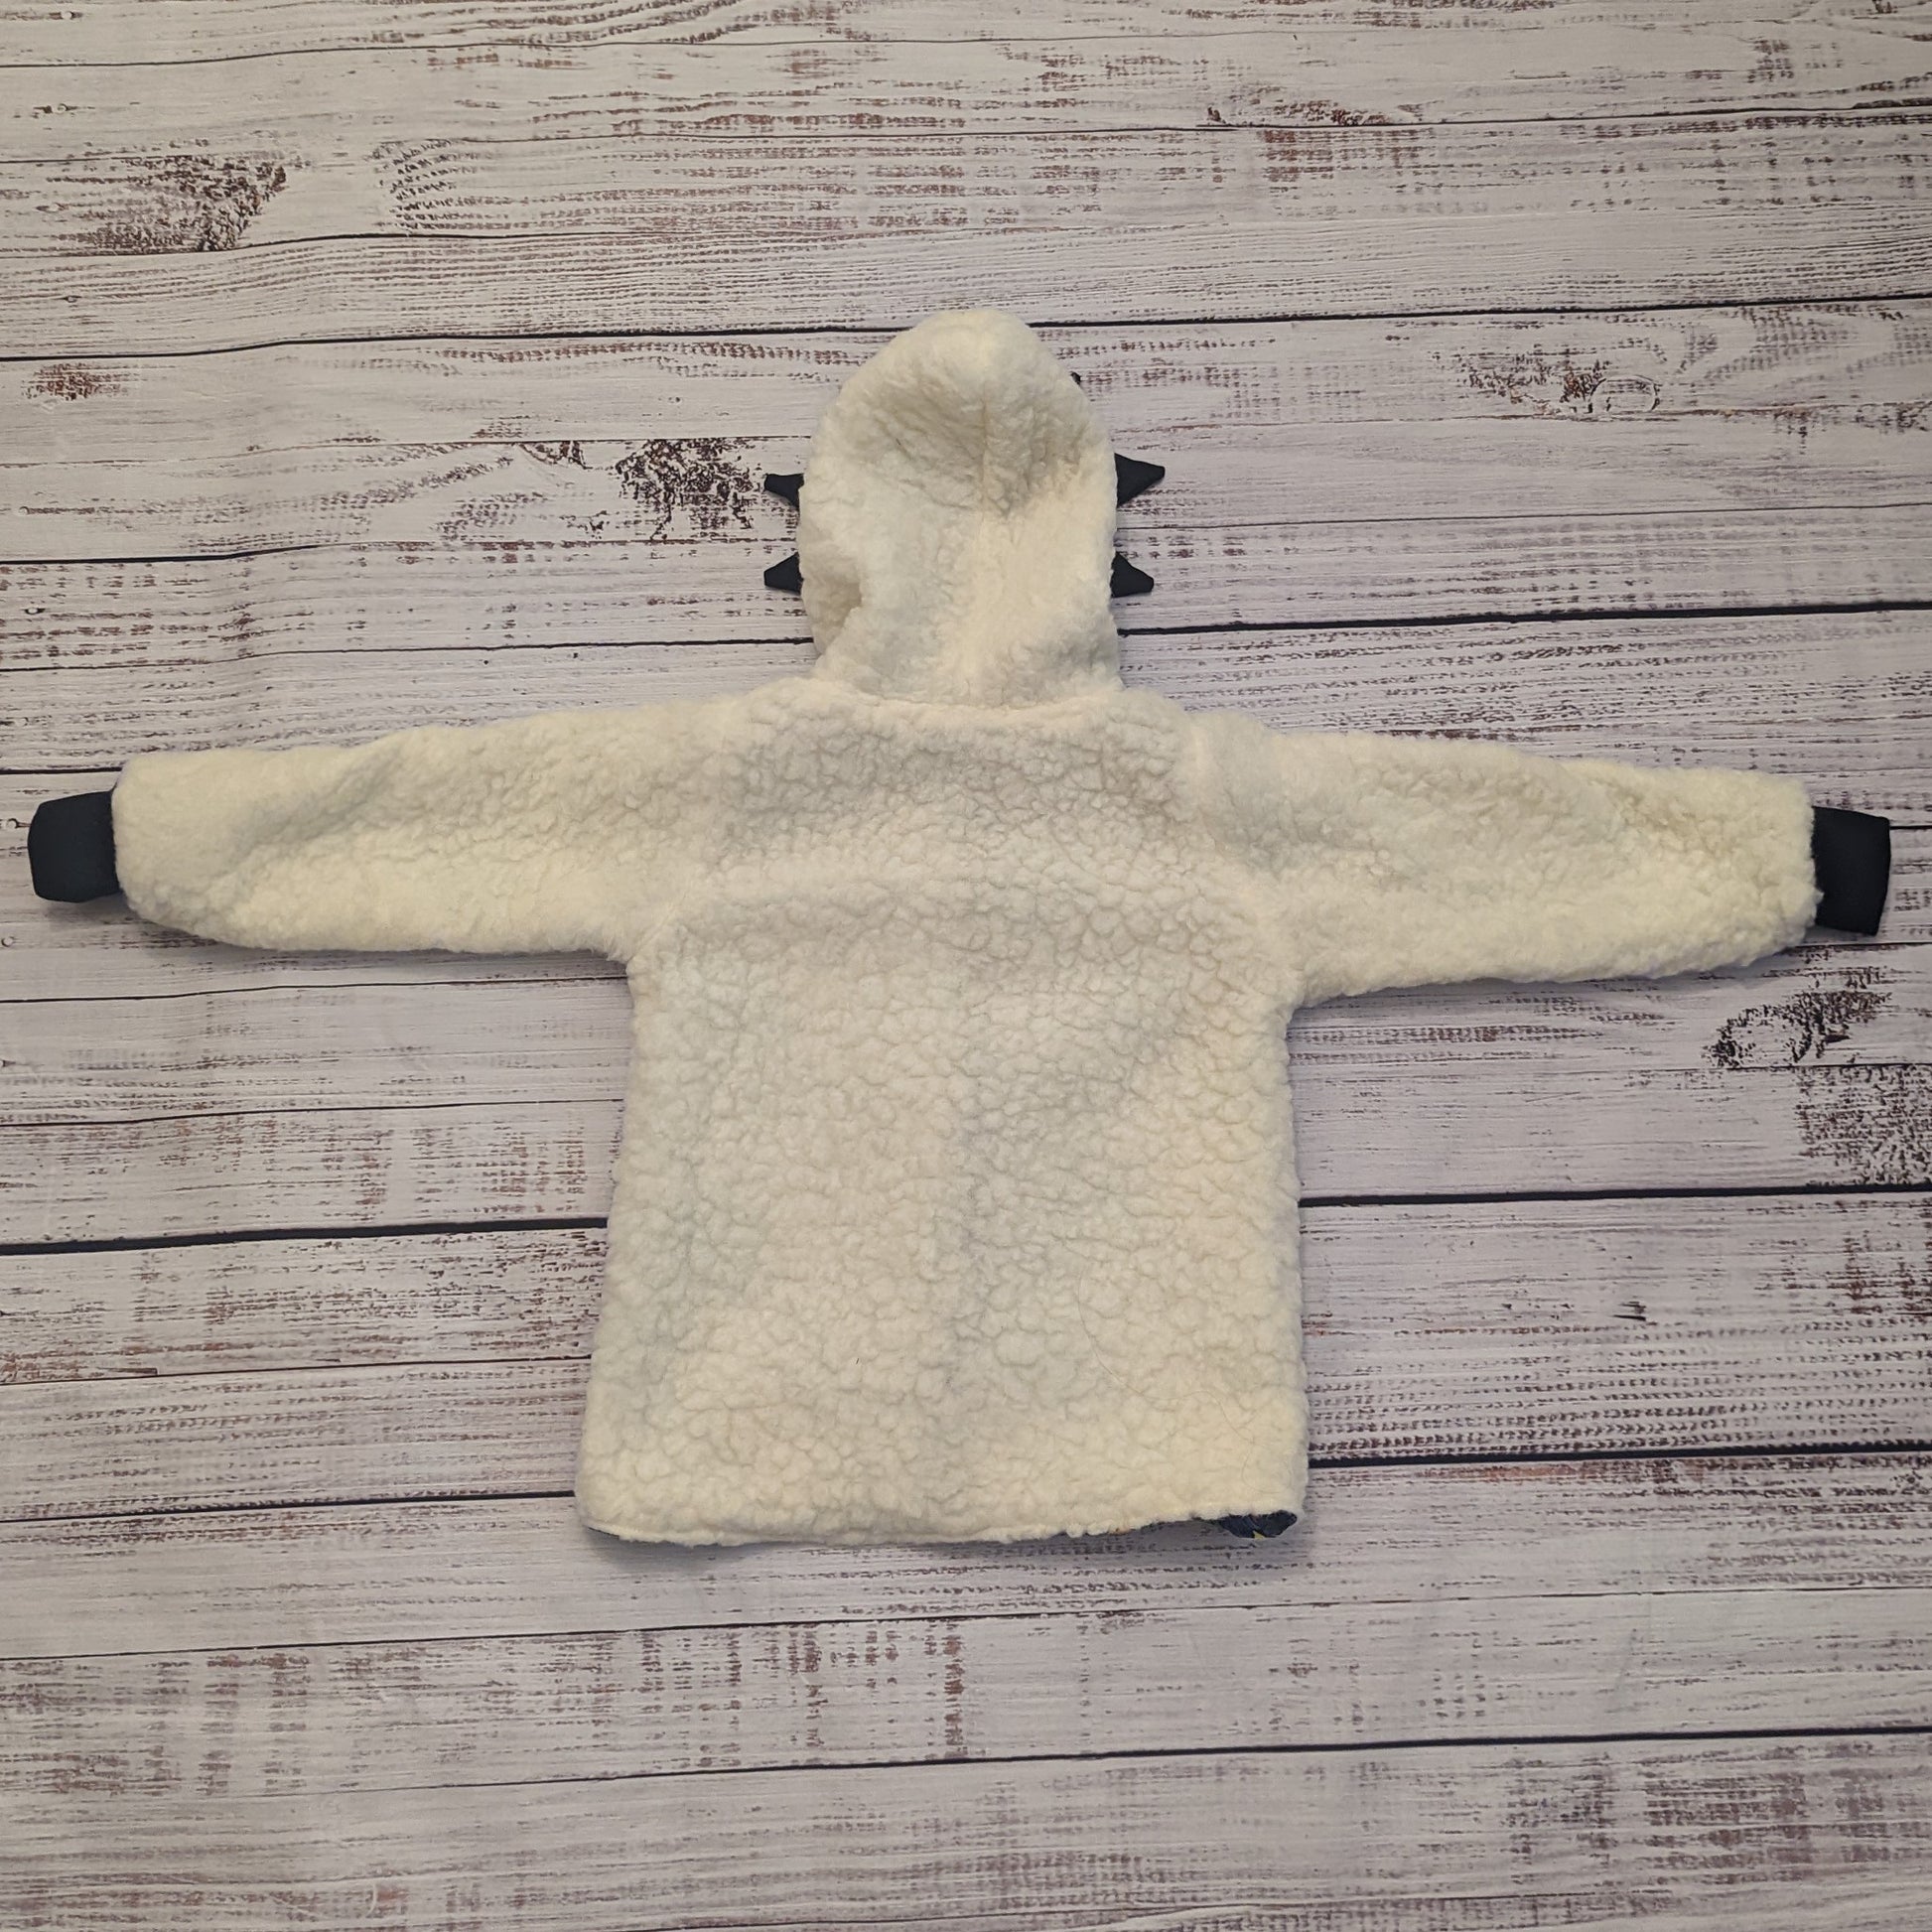 The ferociously cool street Dino reversible coat, shown with dinosaur teeth and spines for added fun. Handmade using street dino cotton French terry, black cotton ribbing and sherpa fur. Showing the back when used as a sherpa fur hoodie